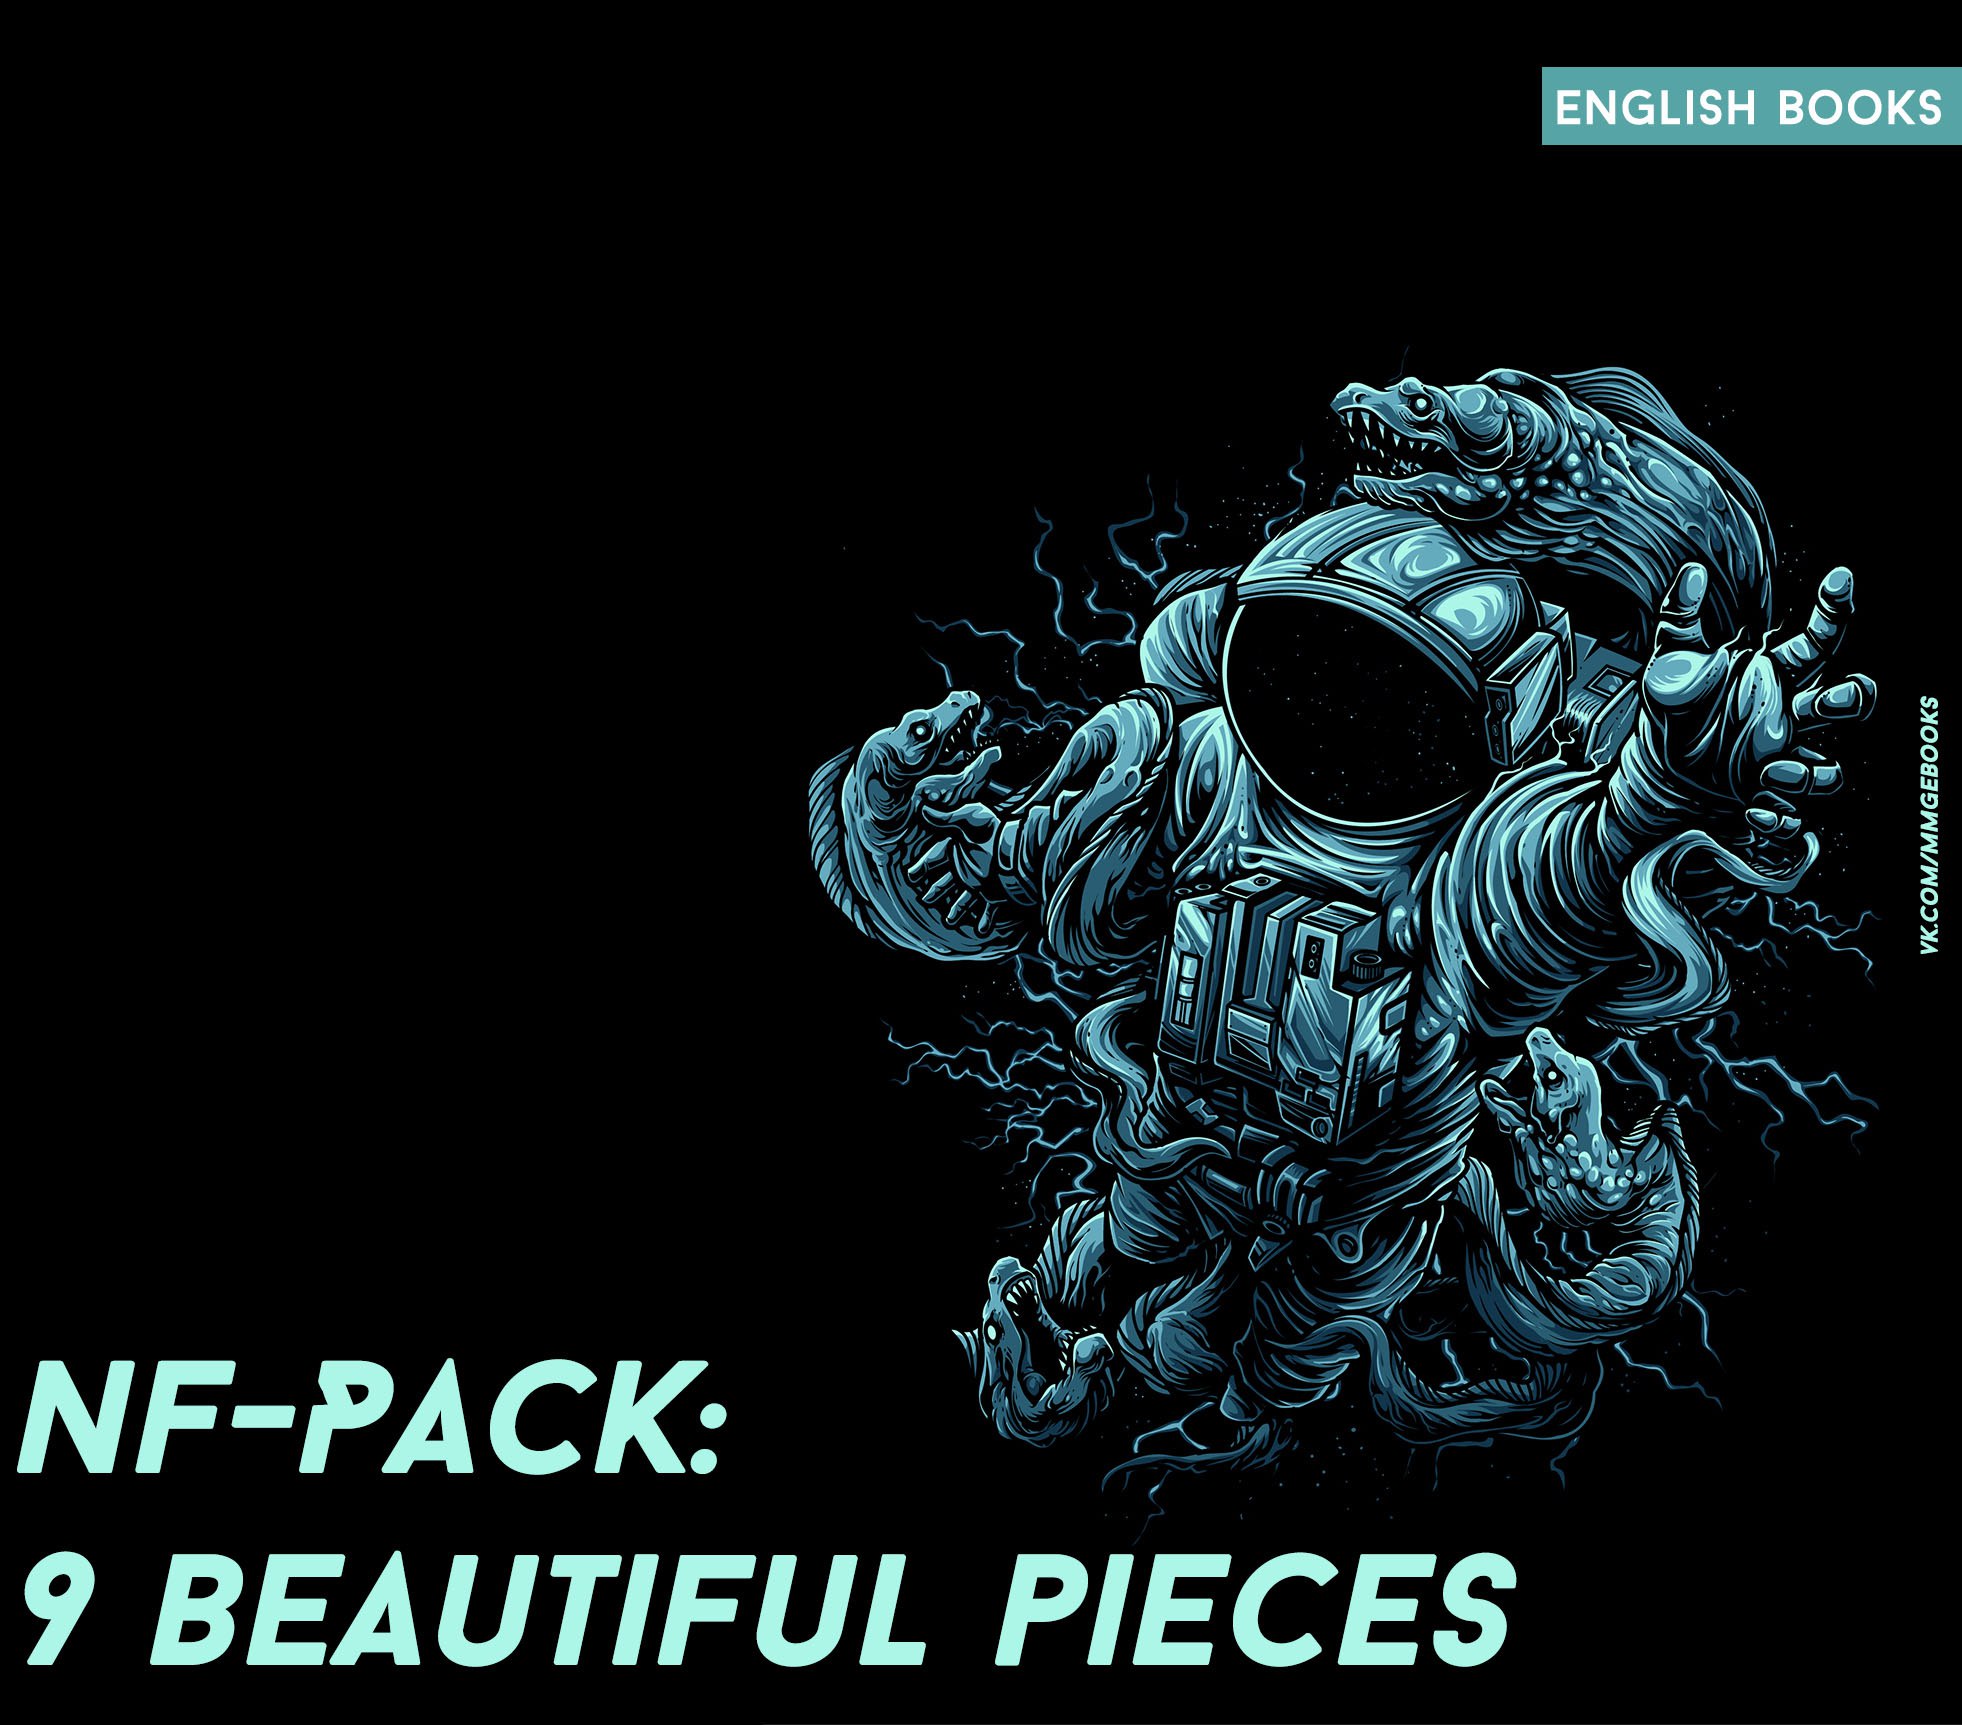 NF-PACK: 9 Beautiful Pieces